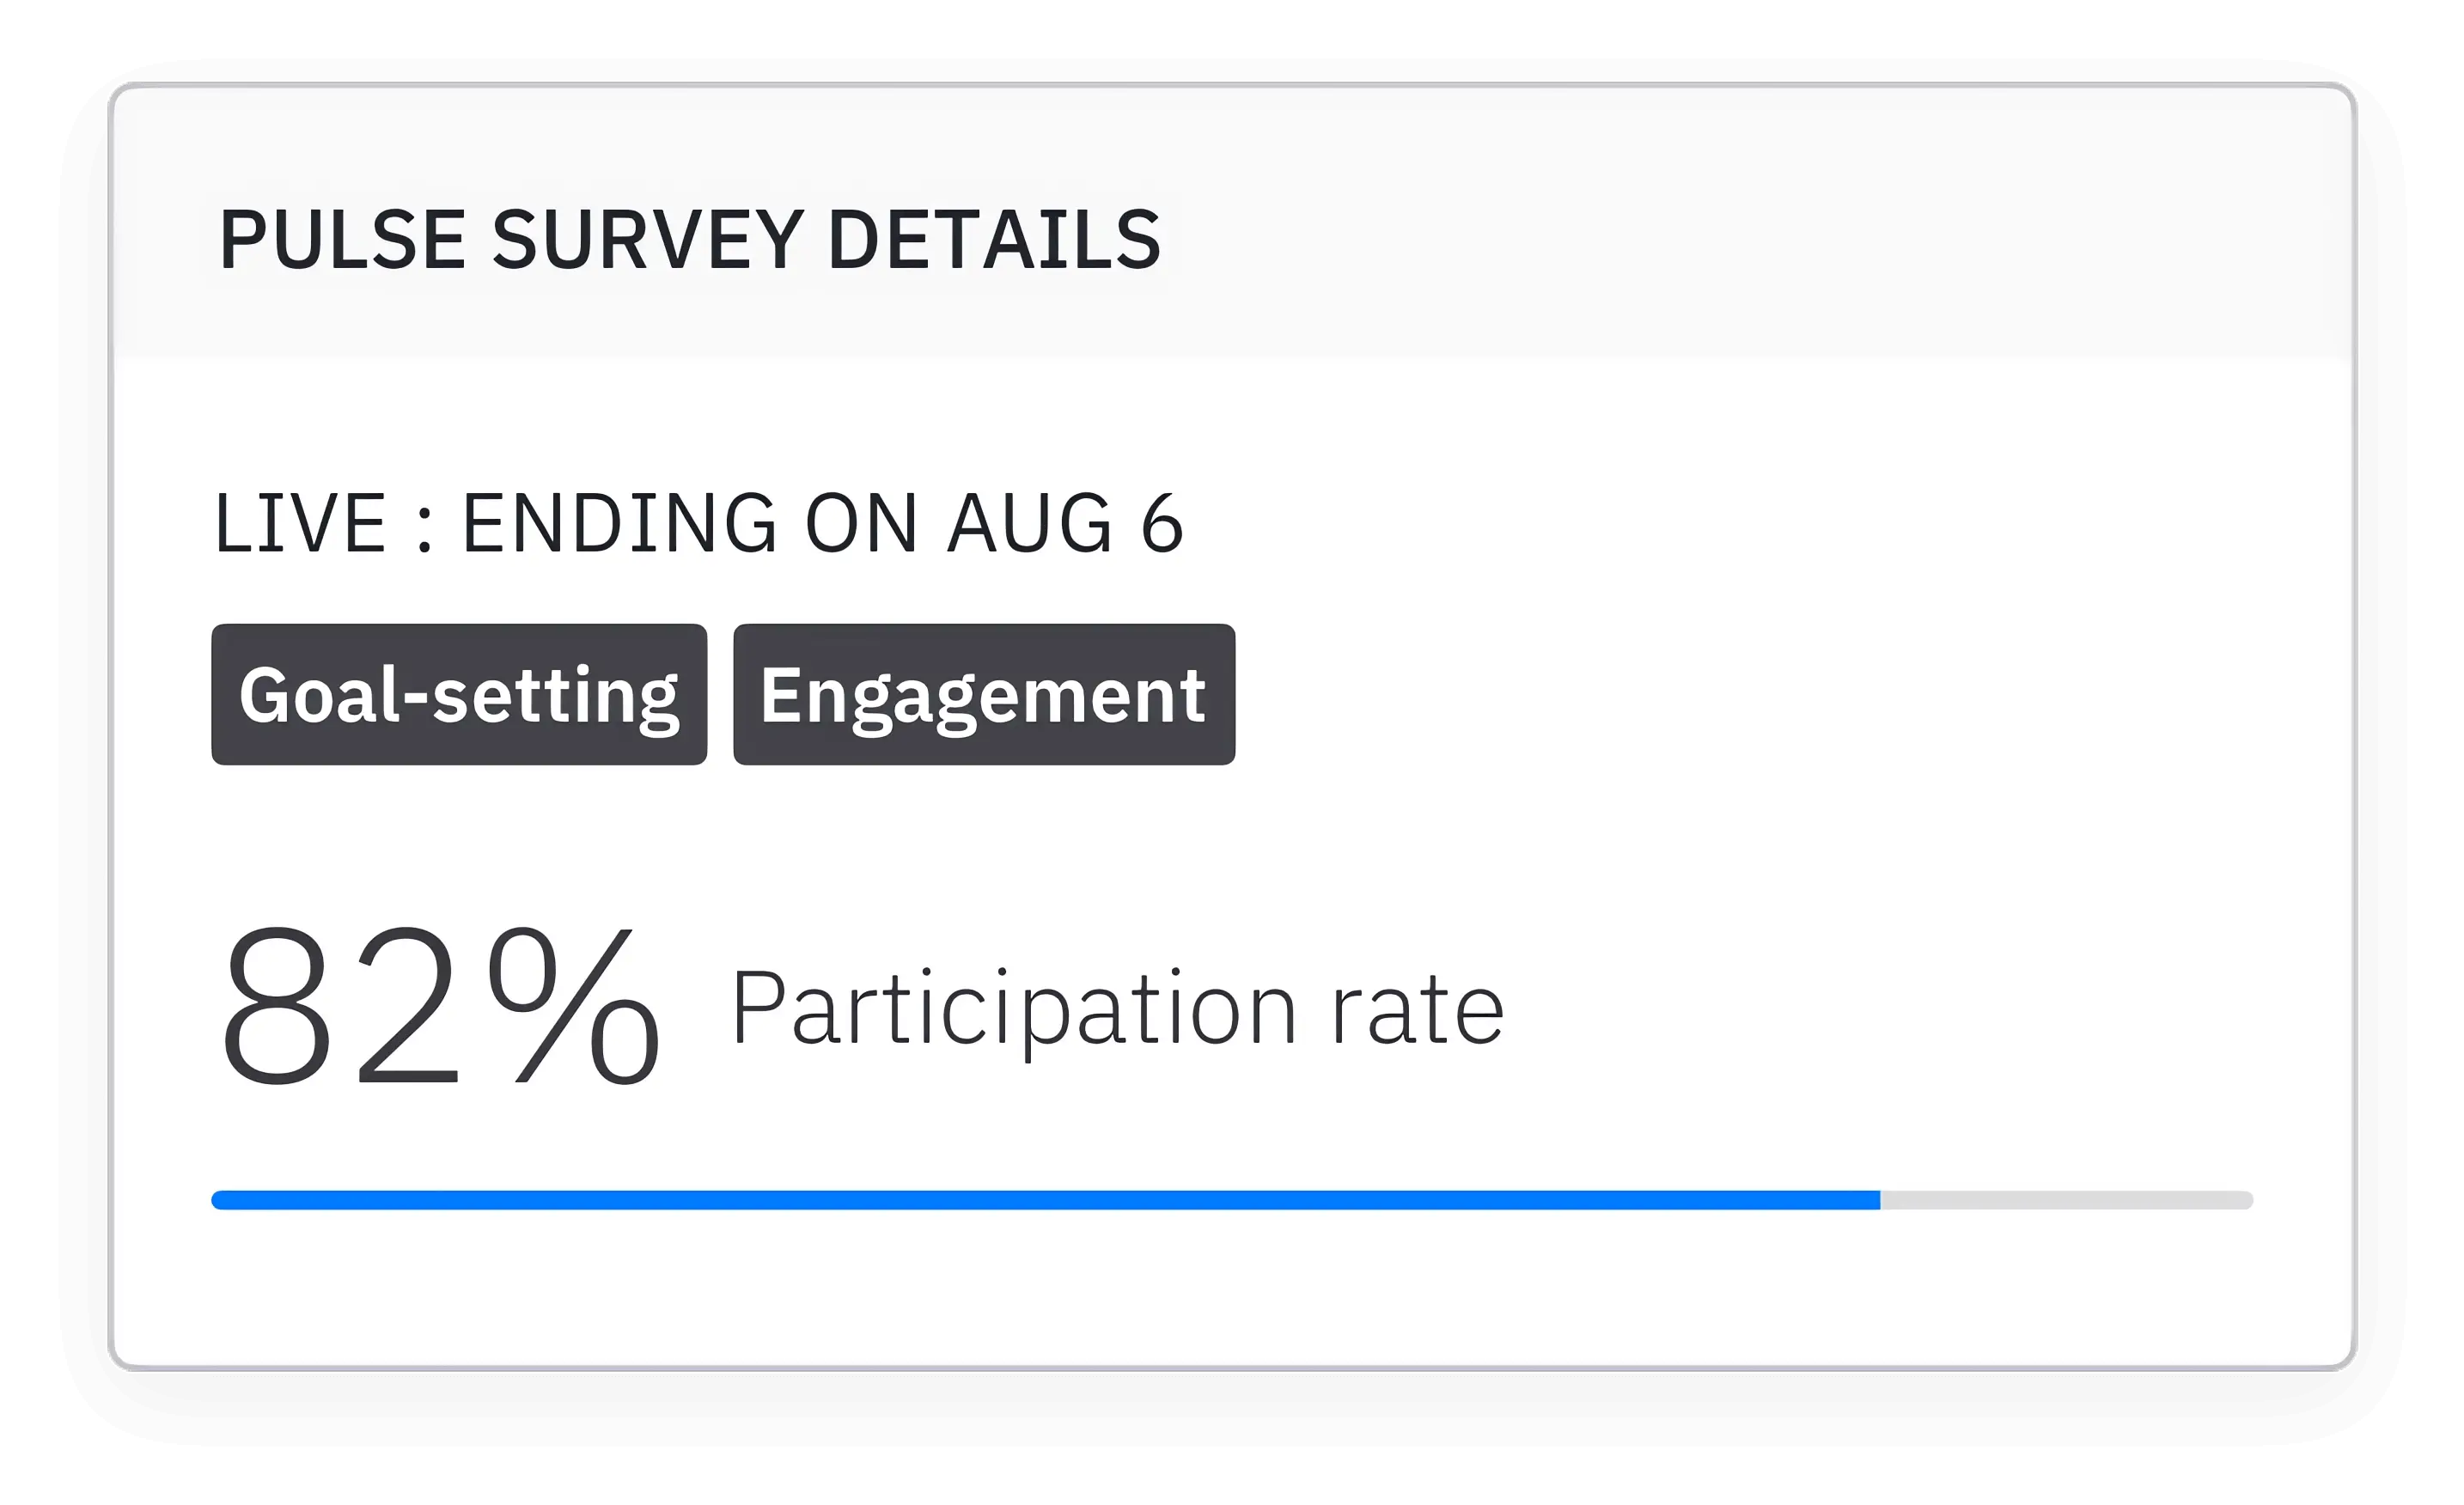 Pulse survey particpation rate snapshot within the pulse survey tool